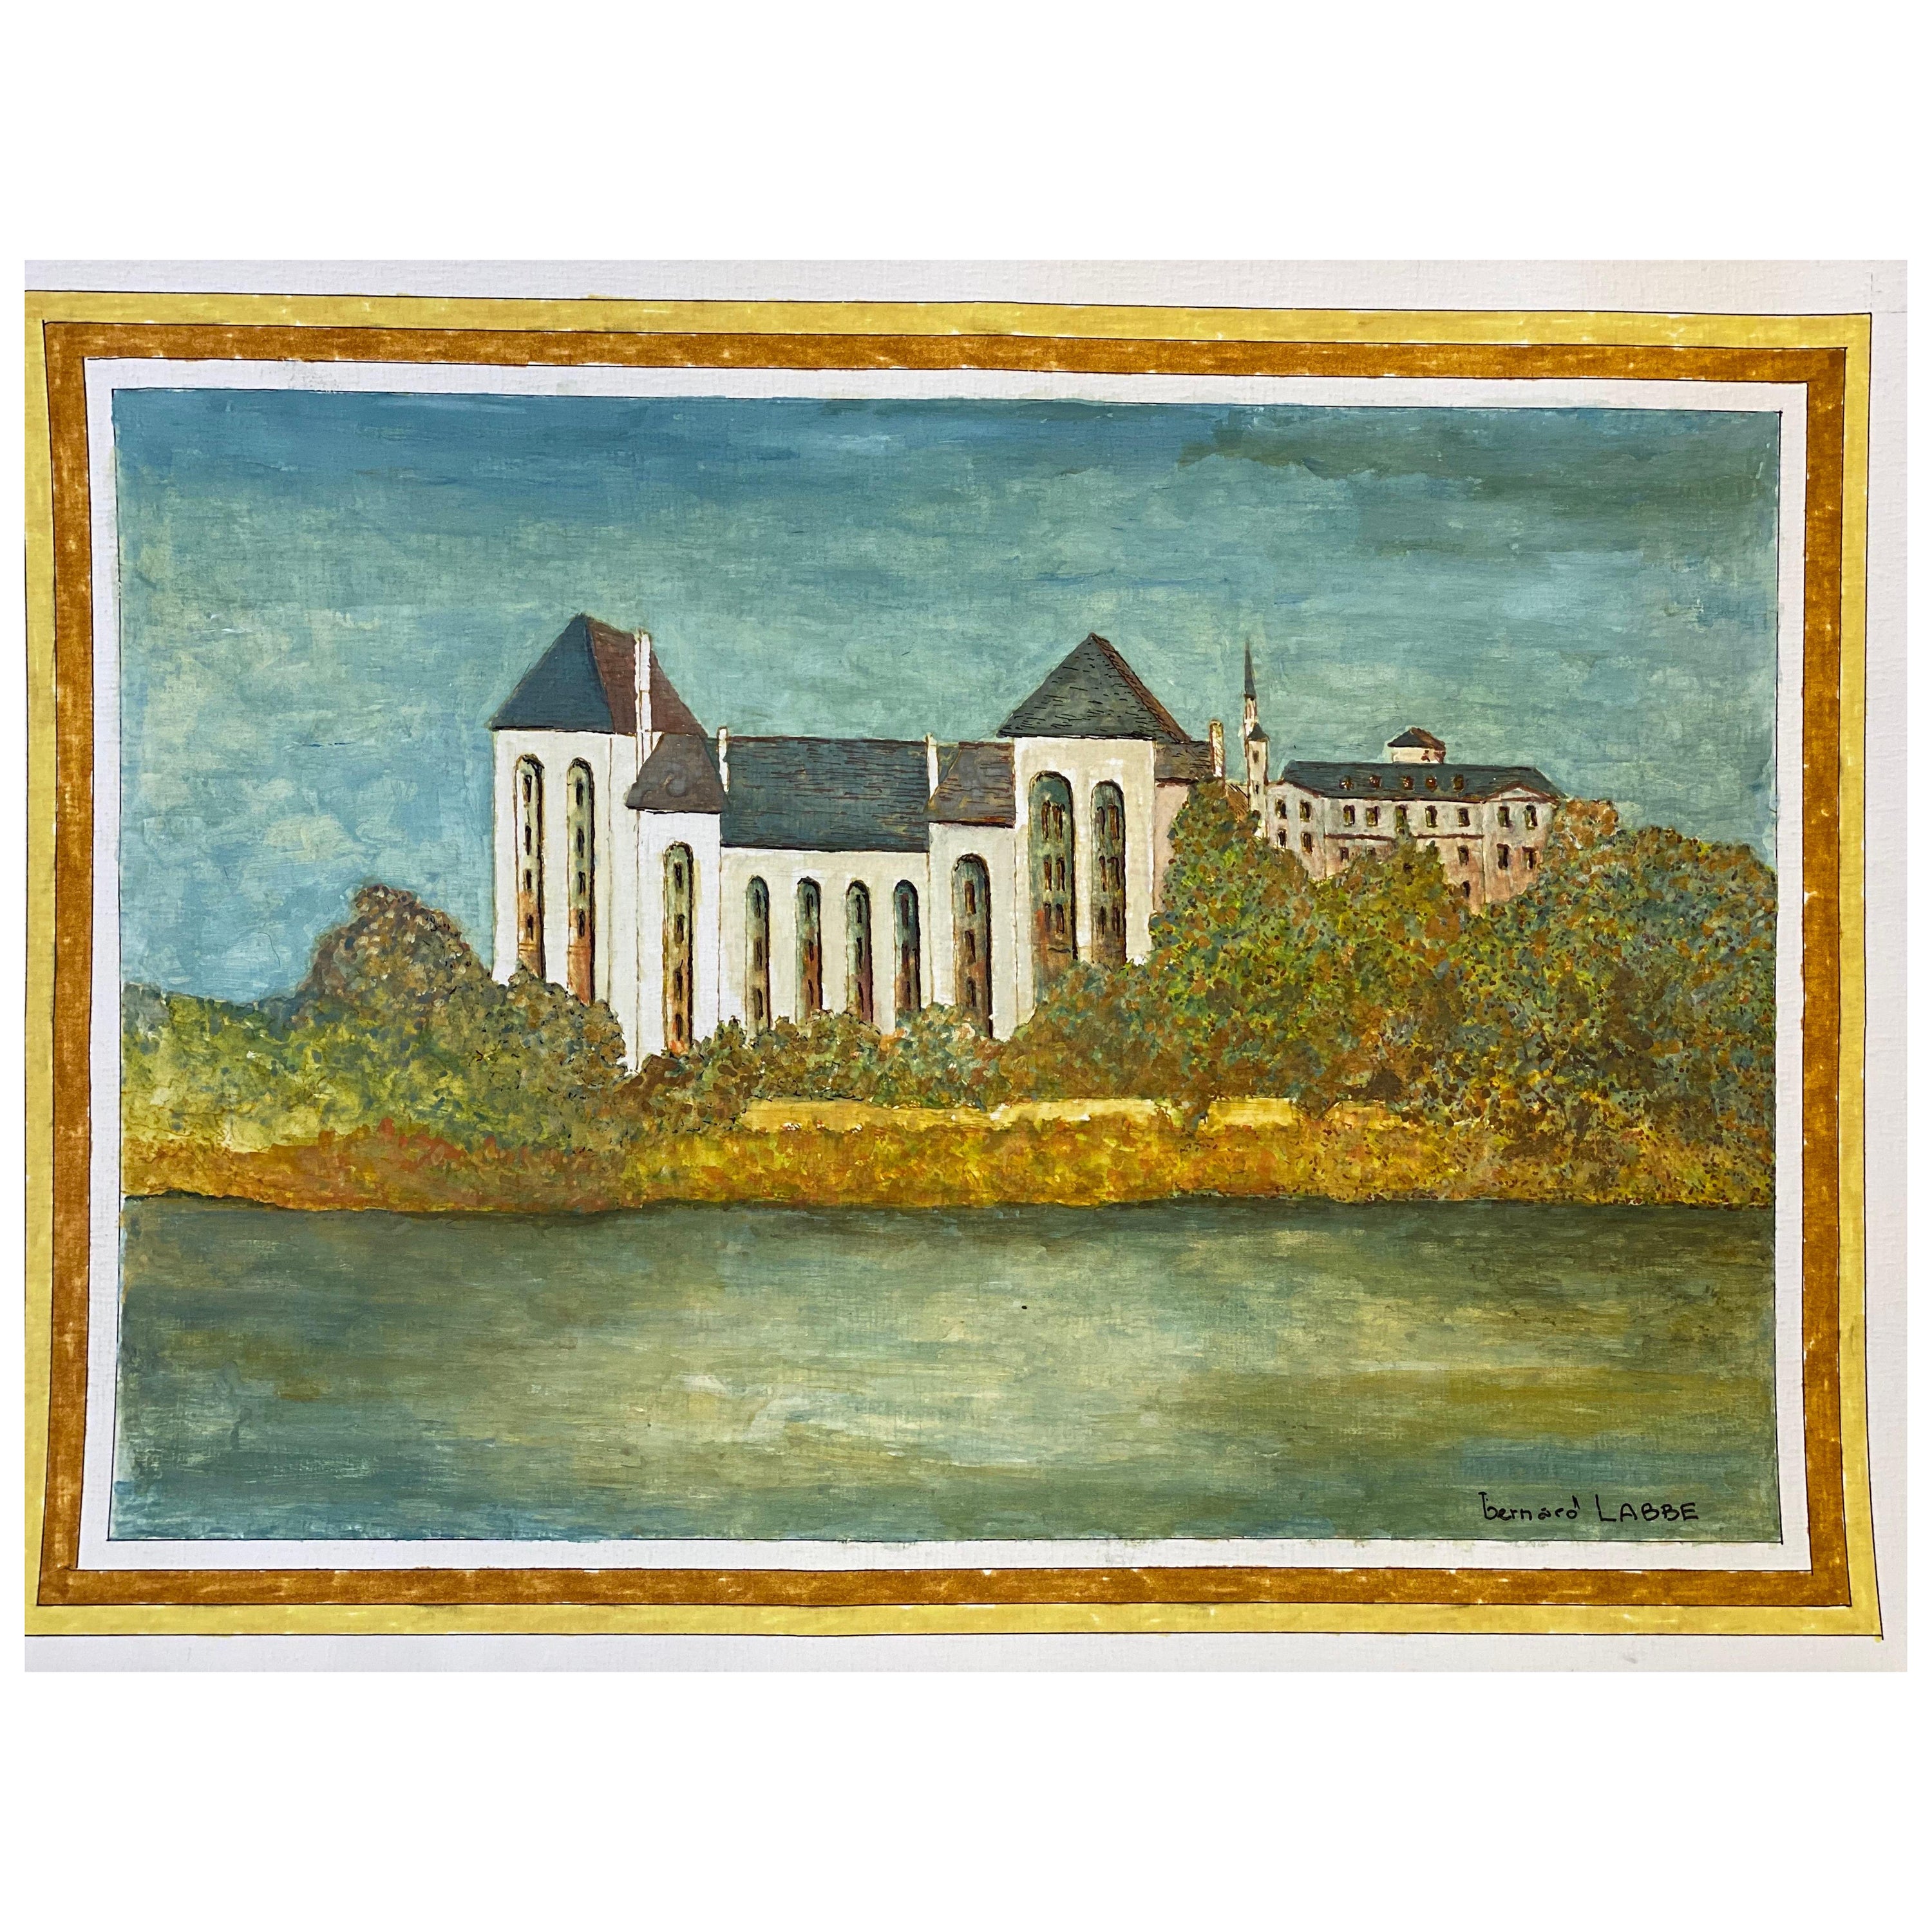 1950's Modernist Signed Painting, Large French Building Over River